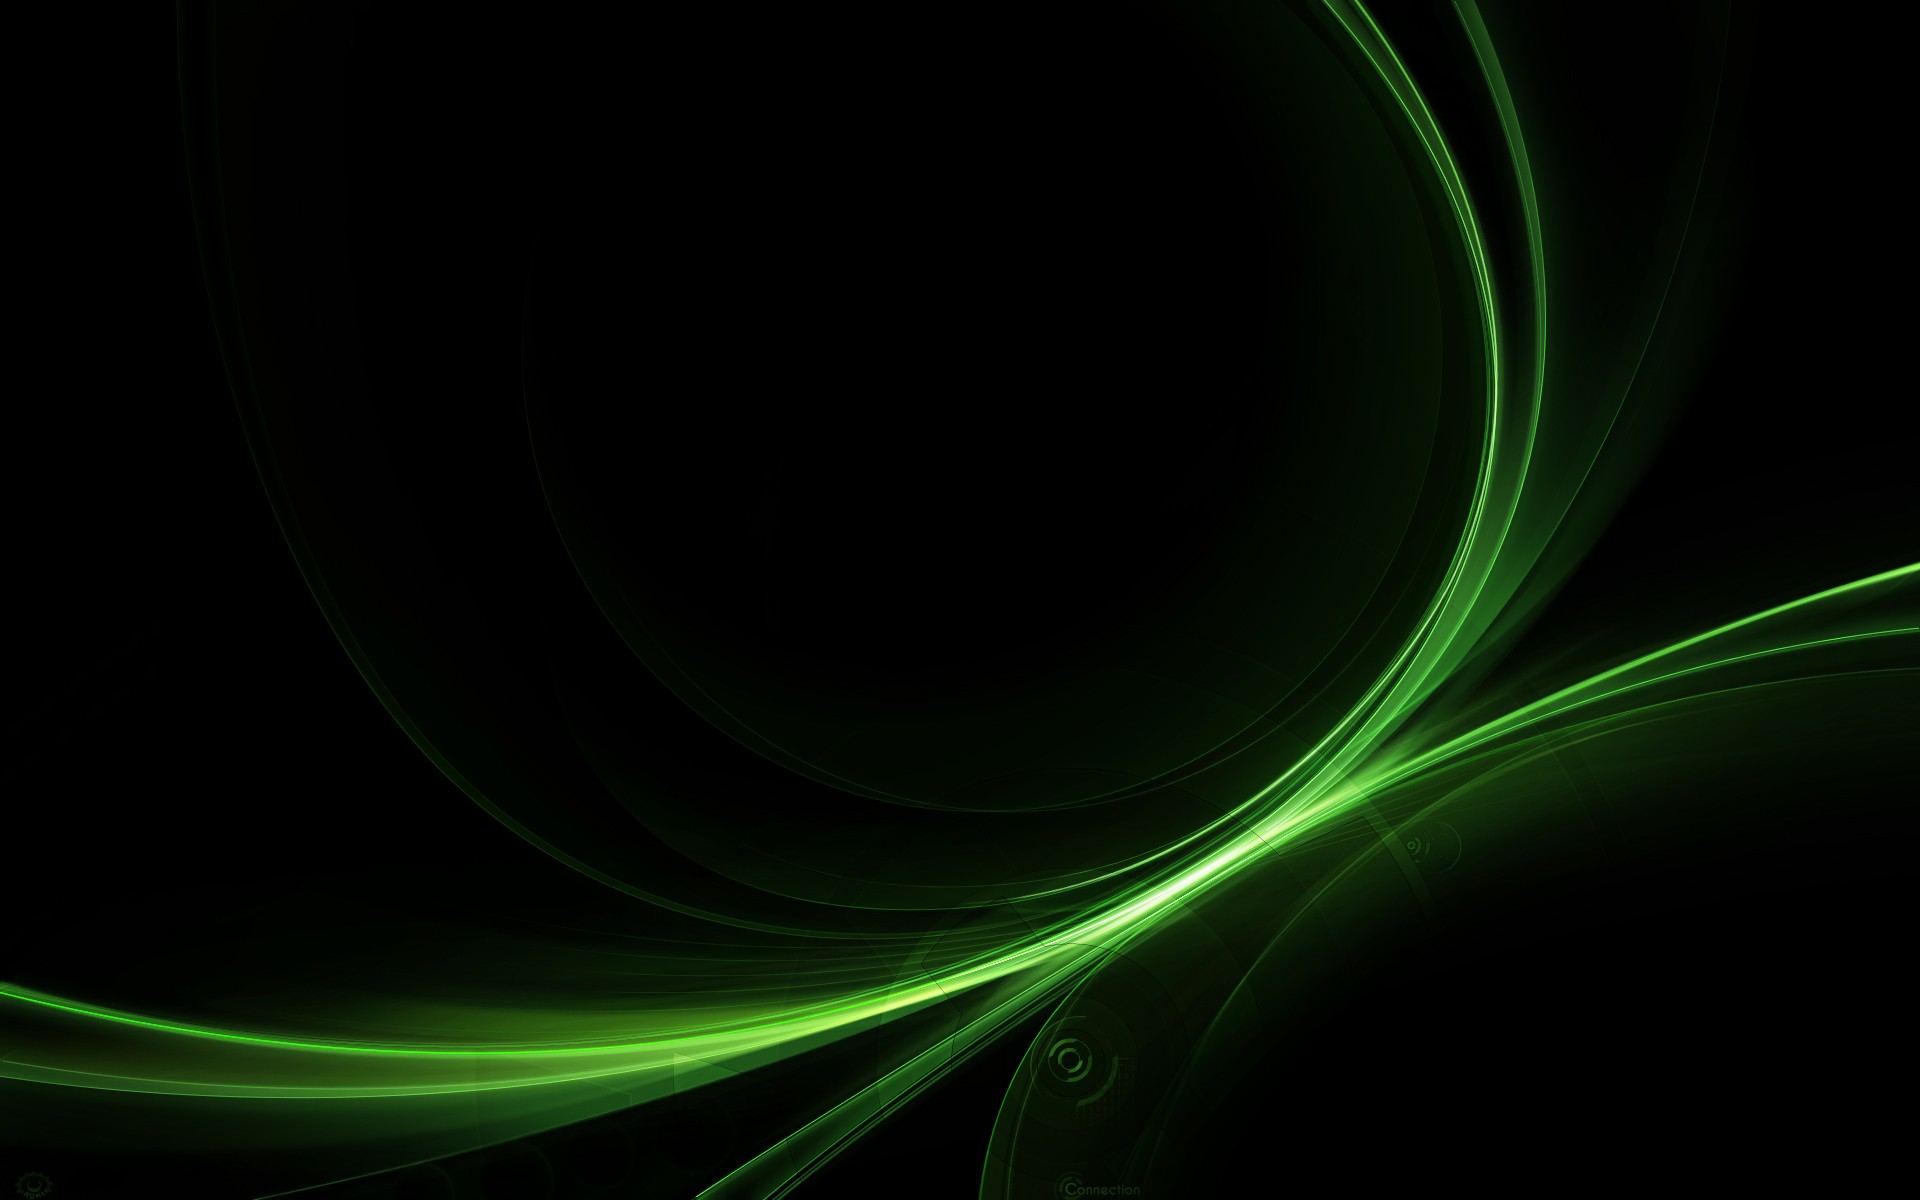  abstract dark lines wallpaper high definition wallpapers background1 1920x1200